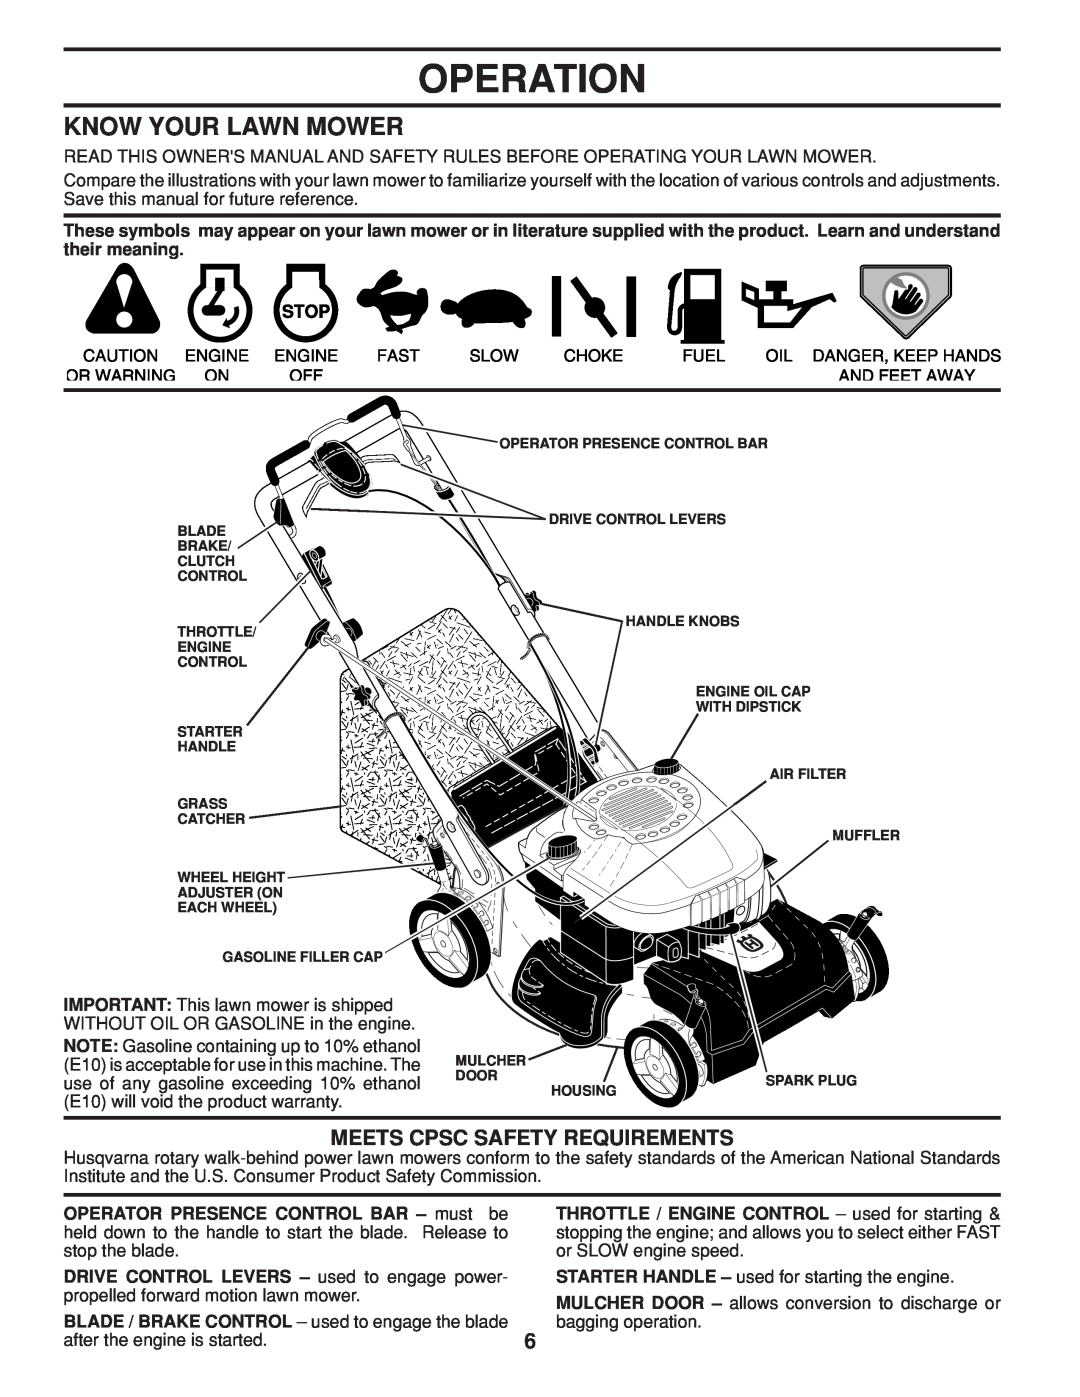 Husqvarna 961430103 Operation, Know Your Lawn Mower, Meets Cpsc Safety Requirements, OPERATOR PRESENCE CONTROL BAR - must 